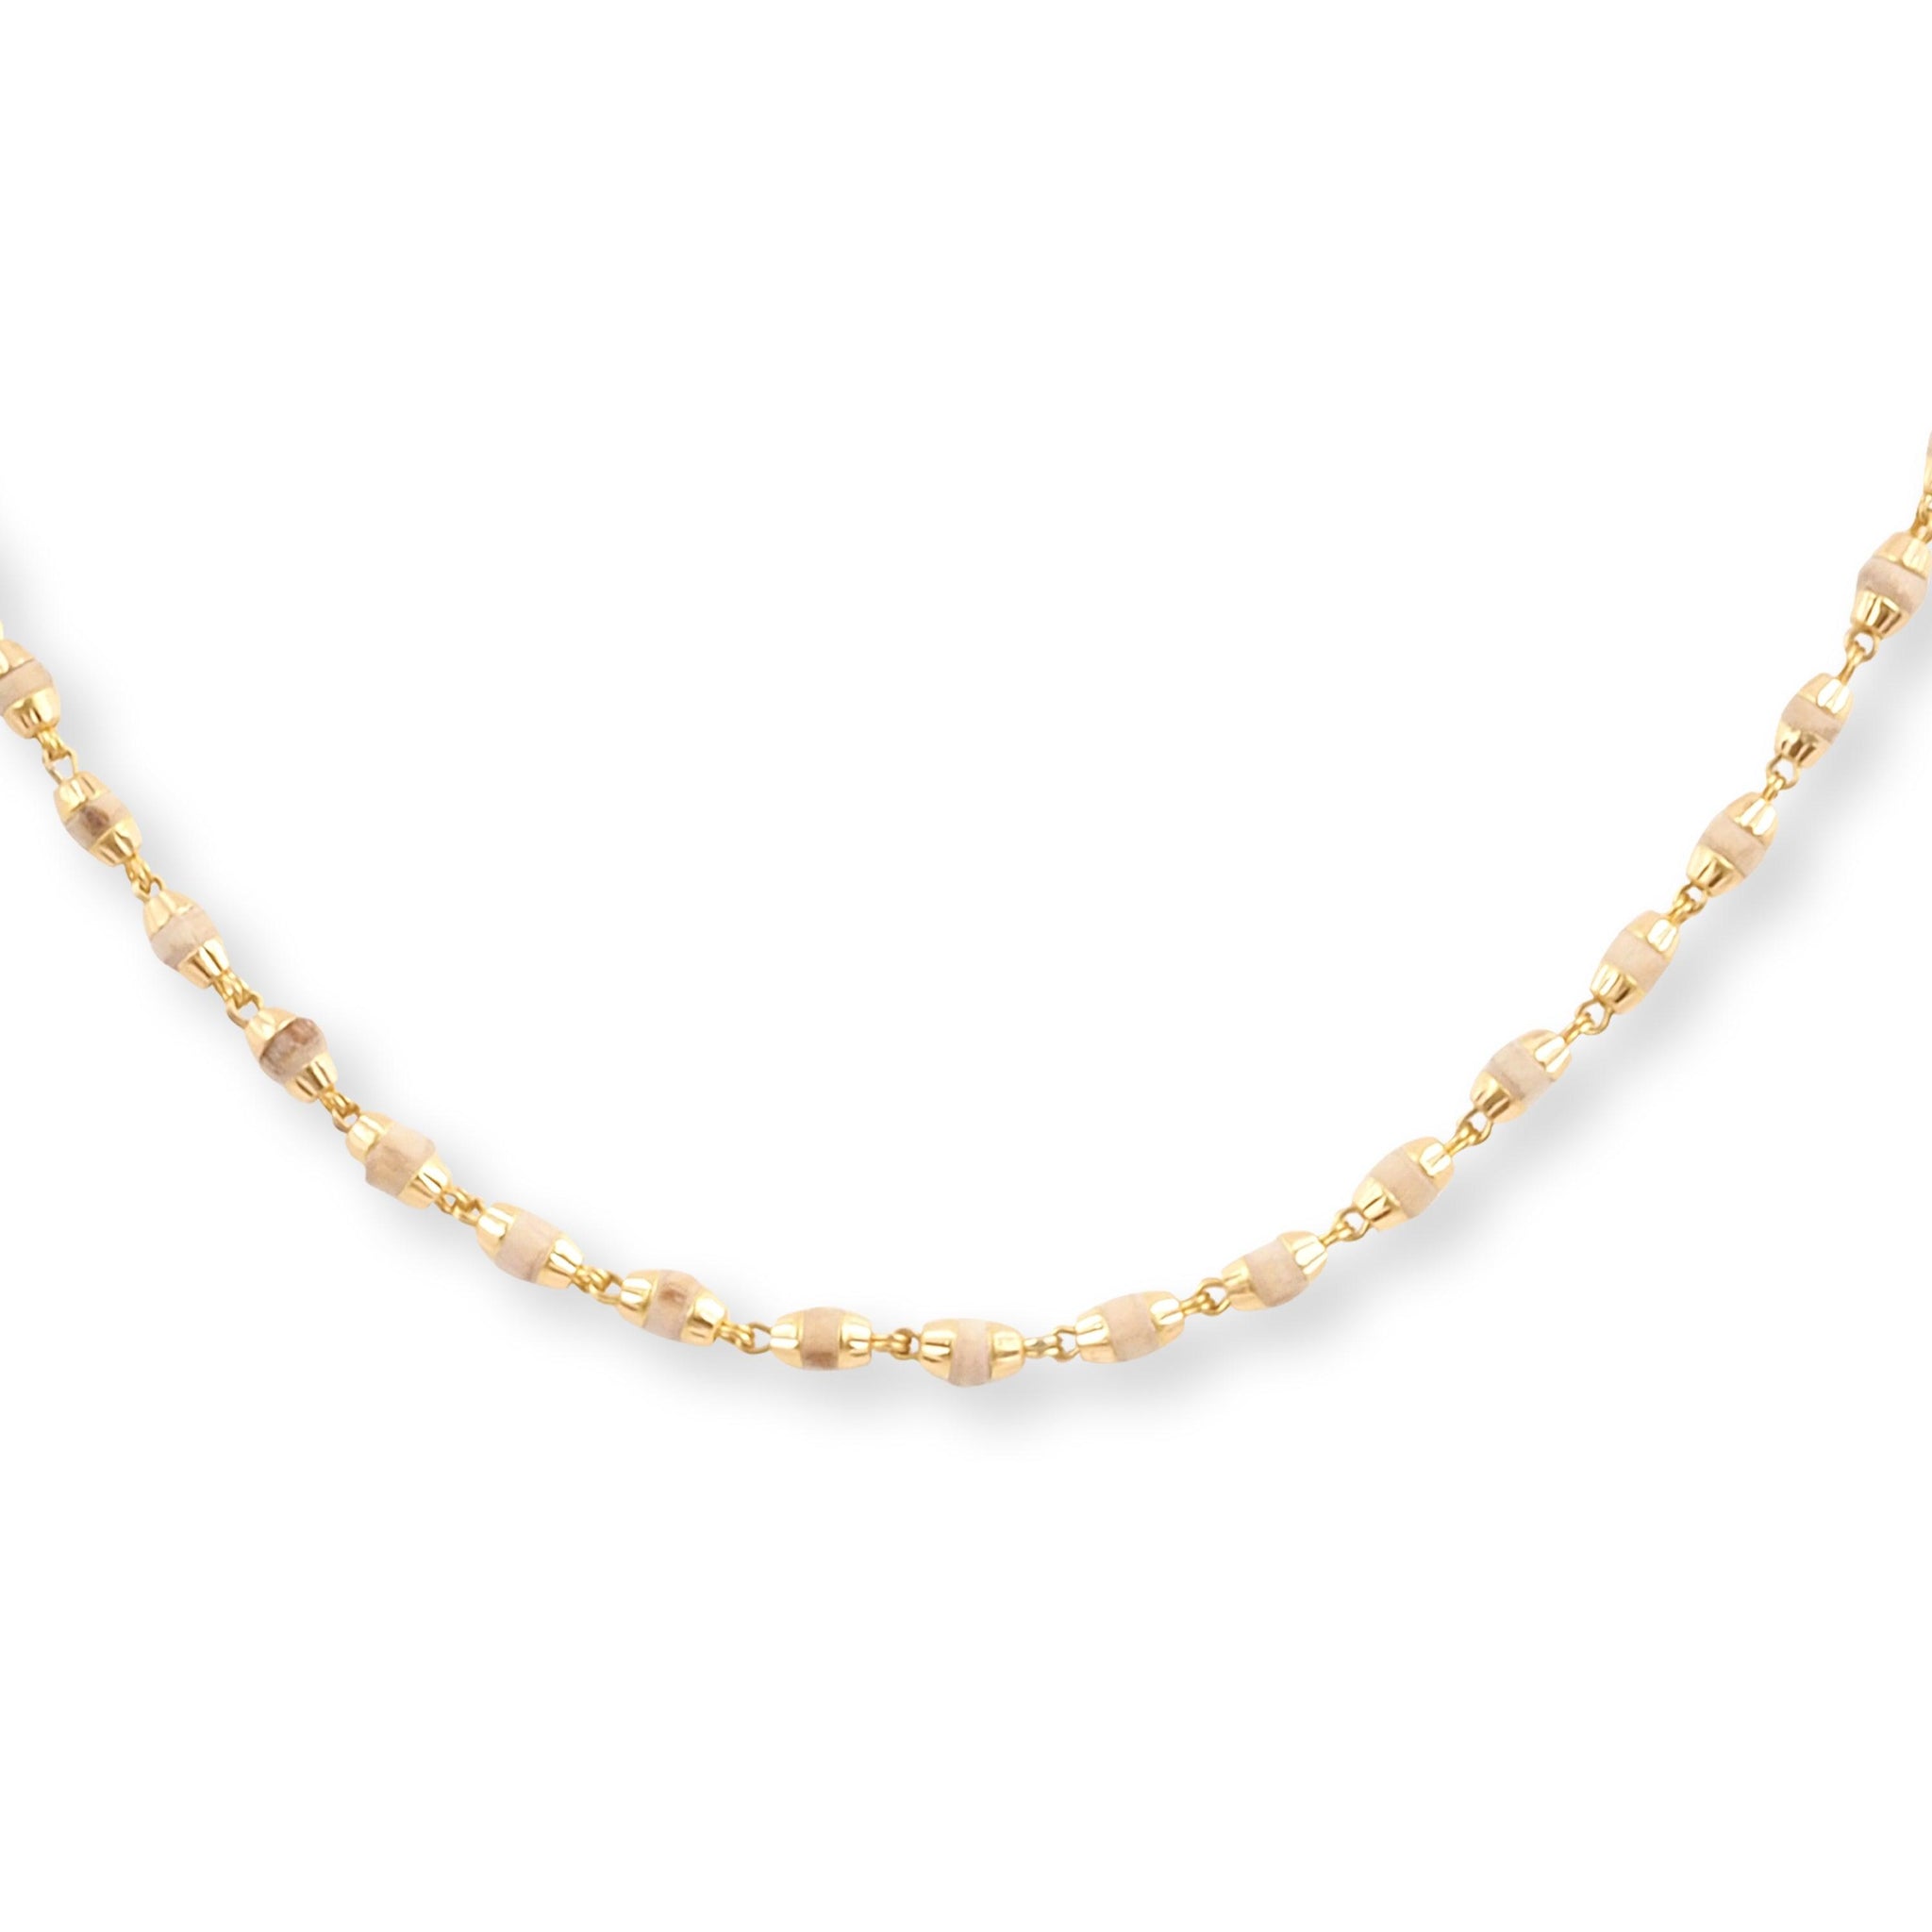 22ct Yellow Gold Chain with Tulsi Beads. C-3811